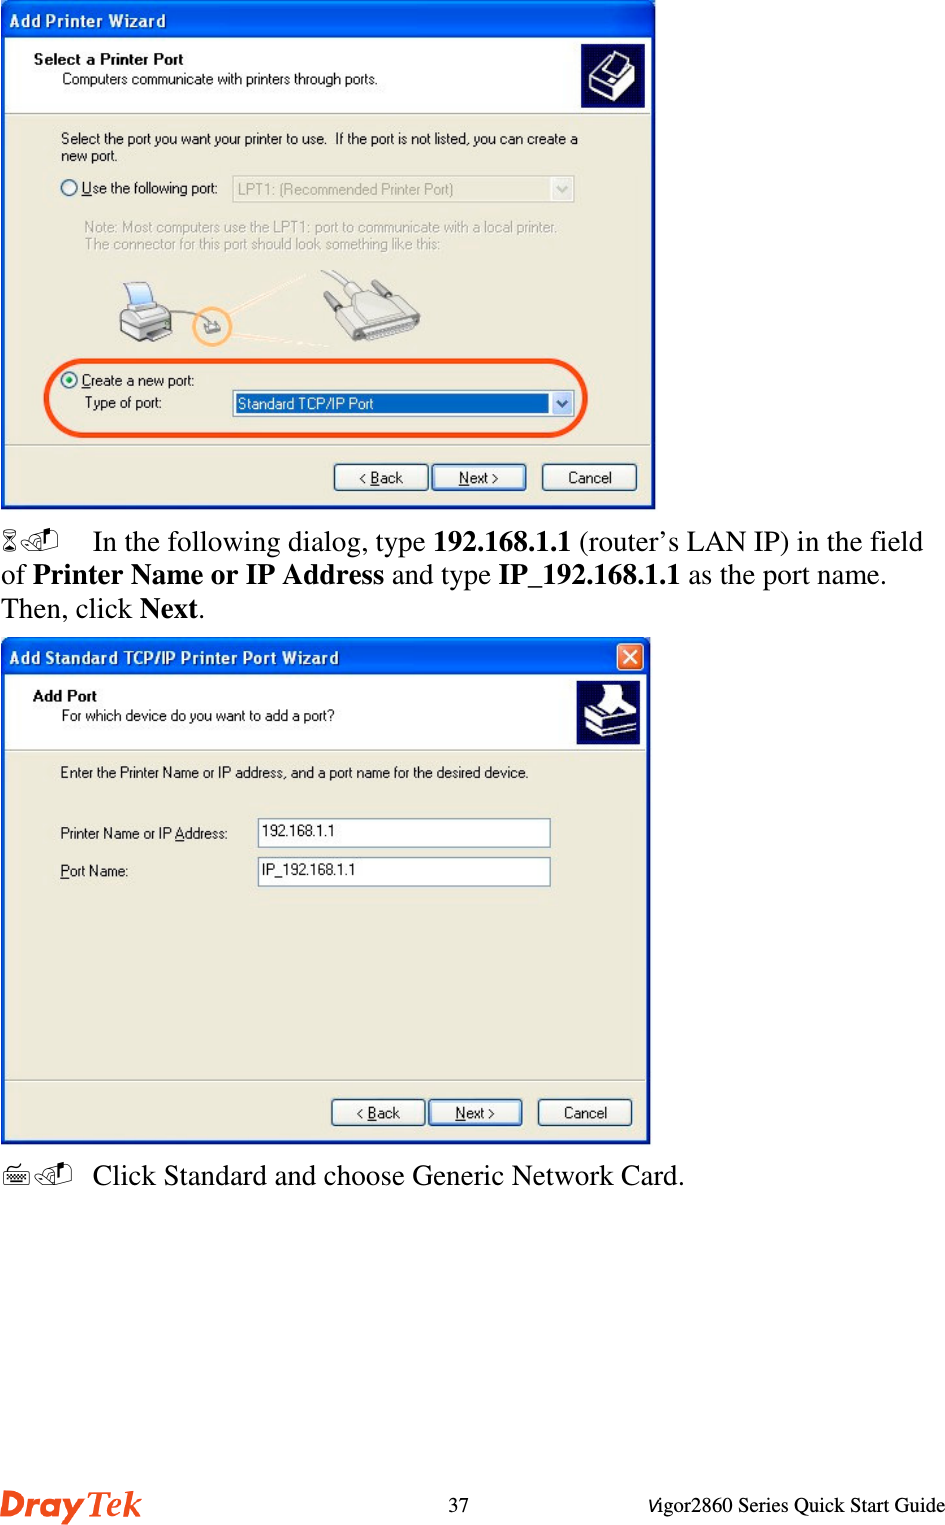 Vigor2860 Series Quick Start Guide37 In the following dialog, type 192.168.1.1 (router’s LAN IP) in the fieldof Printer Name or IP Address and type IP_192.168.1.1 as the port name.Then, click Next.  Click Standard and choose Generic Network Card.